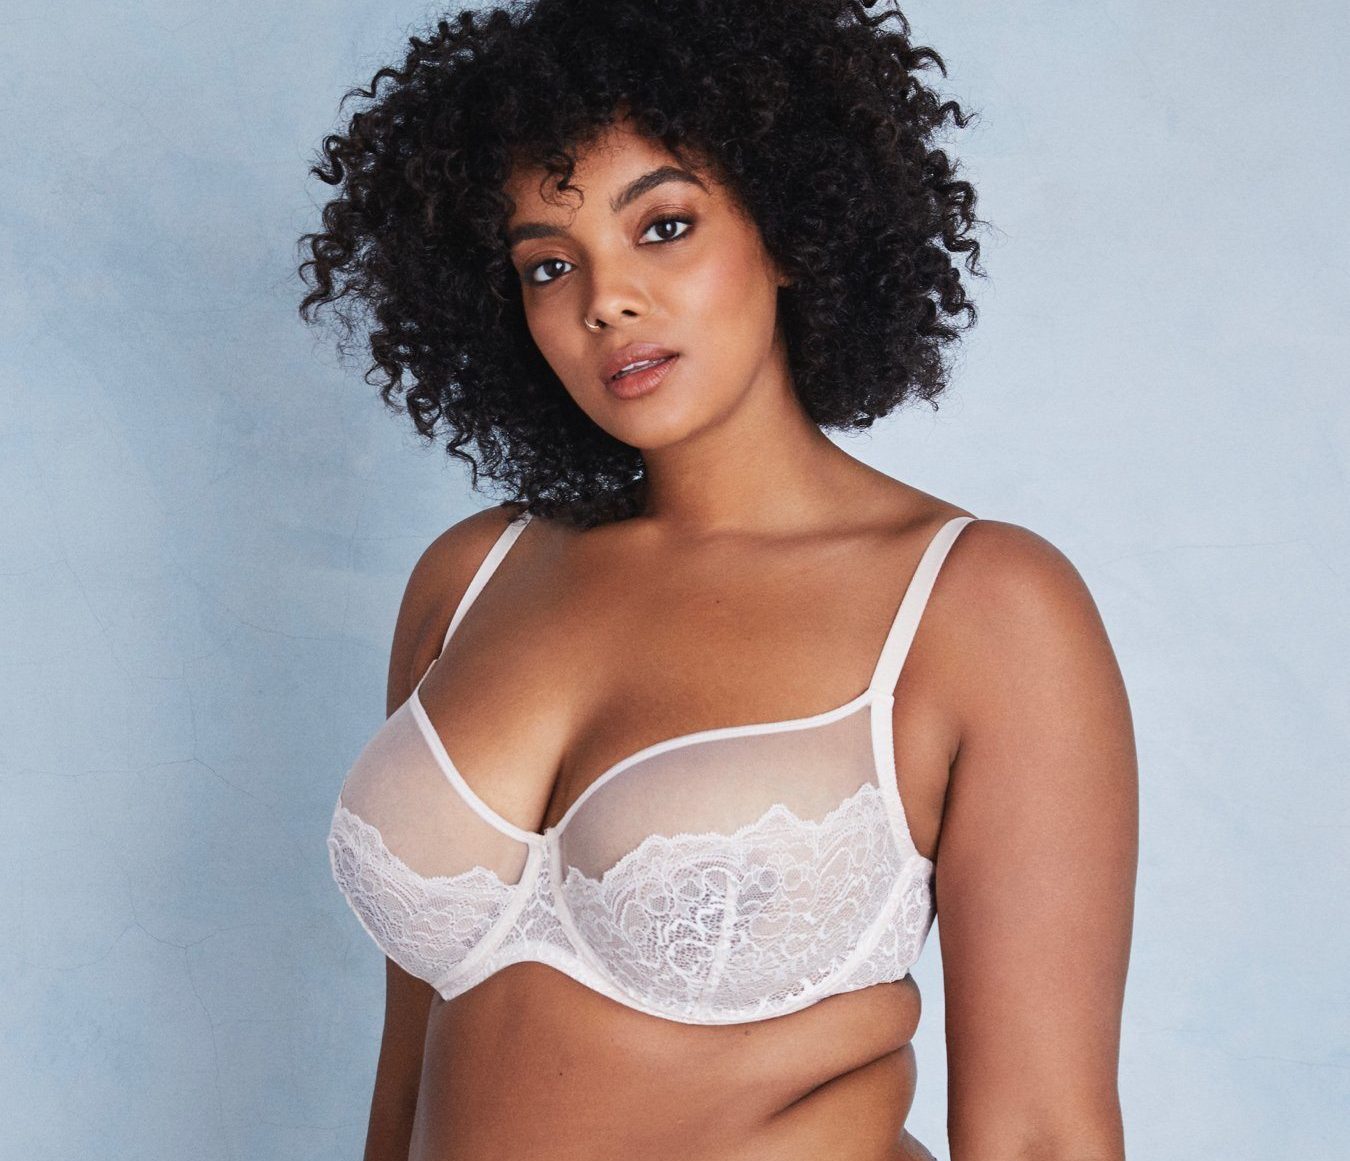 8 bras for back pain, because we could all use more support